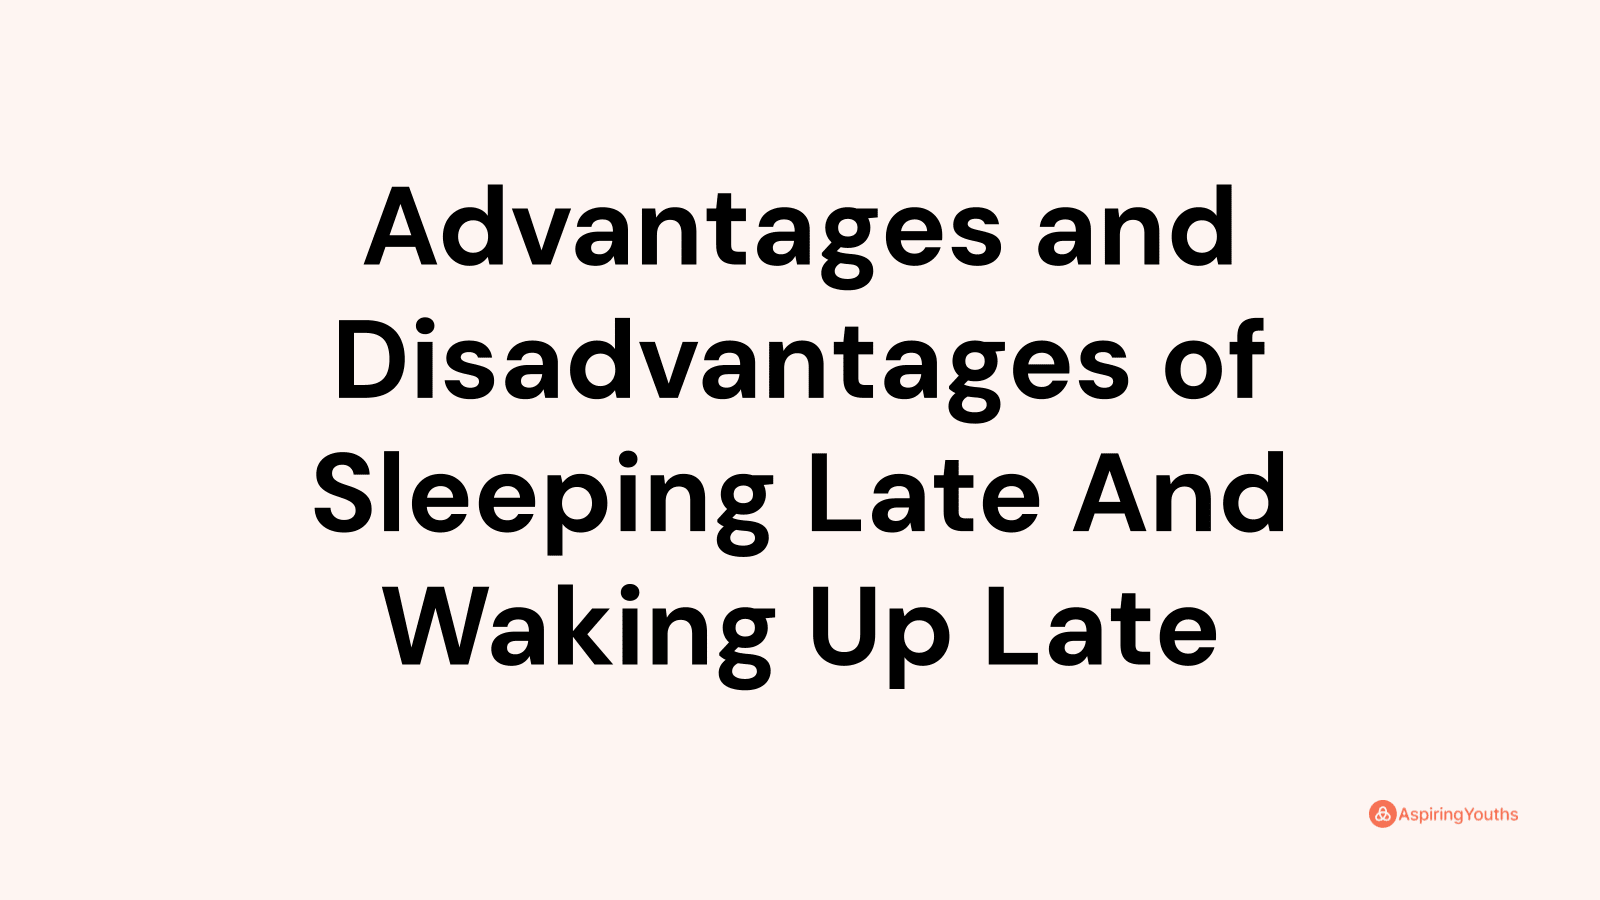 Advantages and disadvantages of Sleeping Late And Waking Up Late